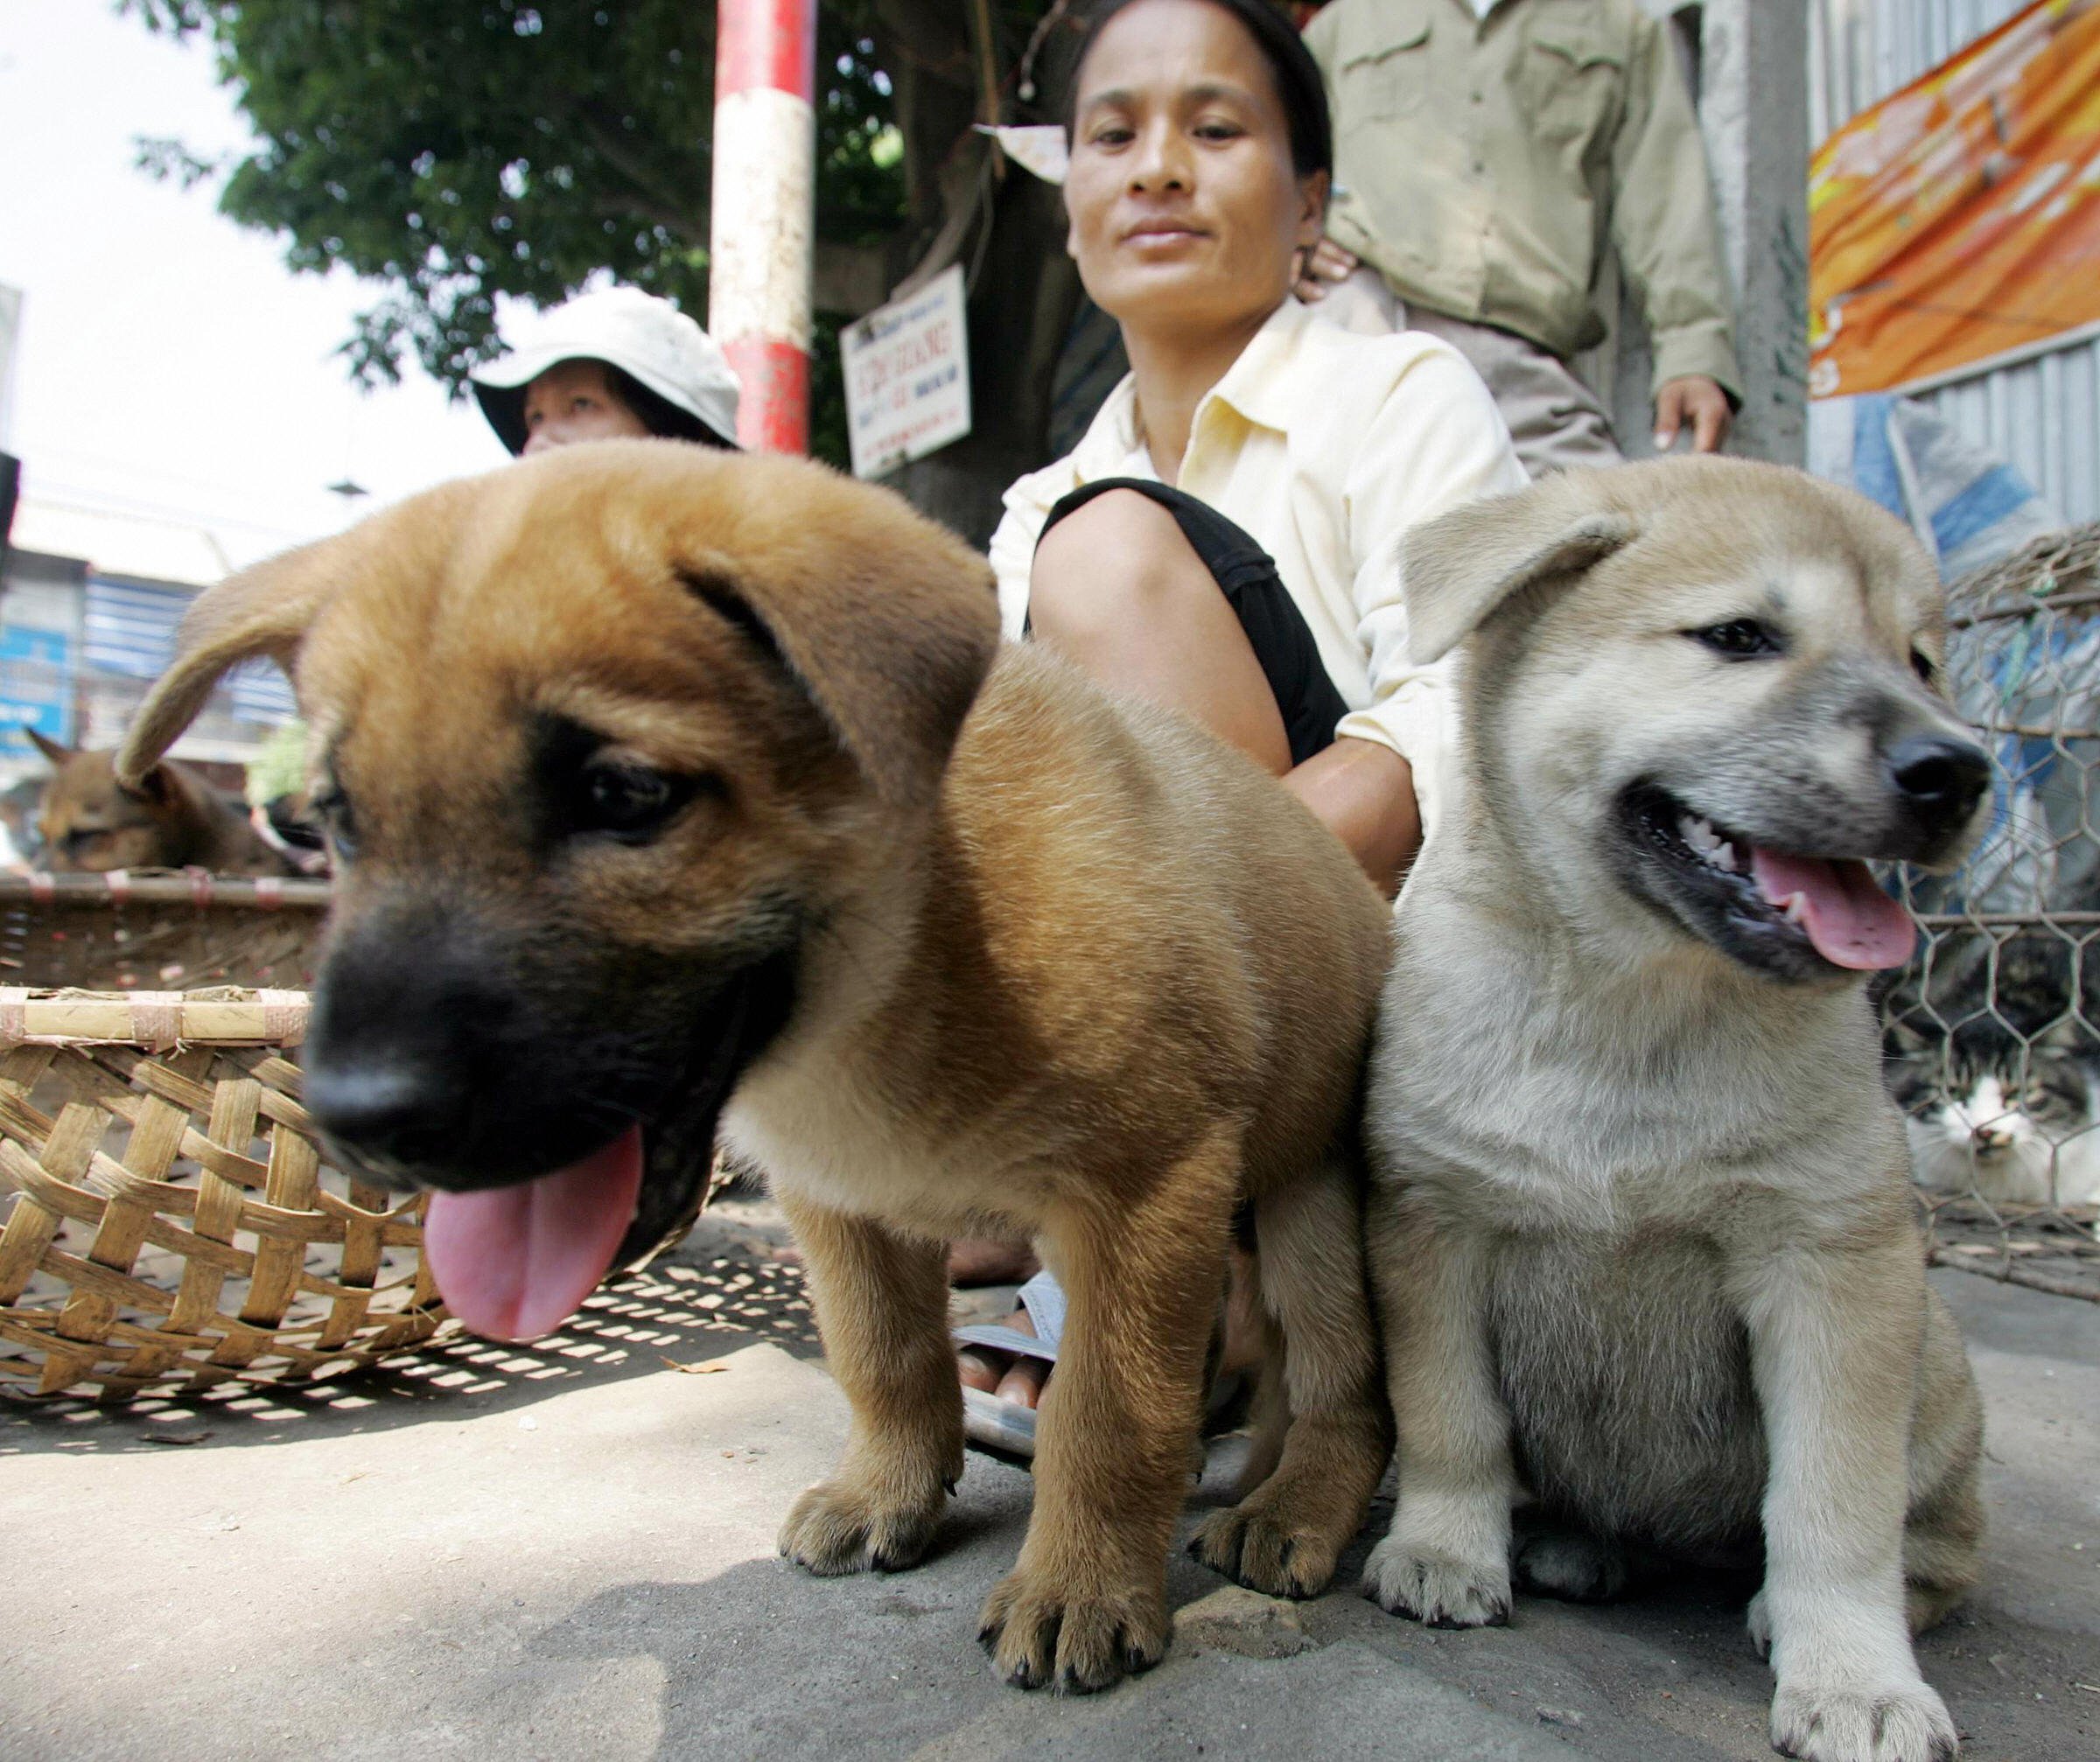 Two women sit selling young dogs at a road side